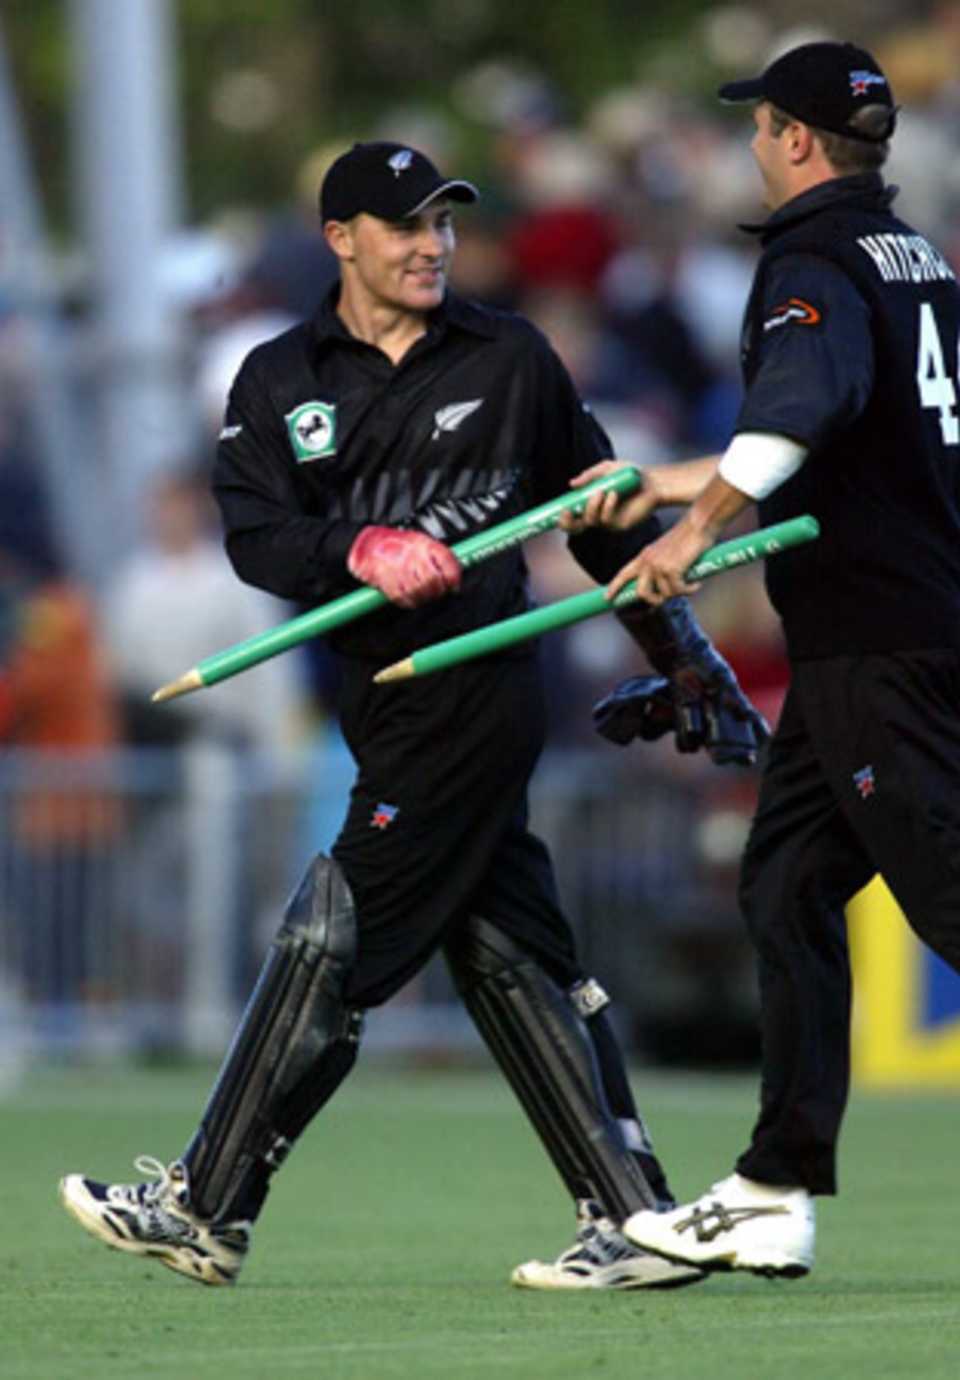 Hitchcock hands McCullum a stump as they leave the field after winning the match. 2nd ODI: New Zealand v India at Napier, 29 Dec 2002